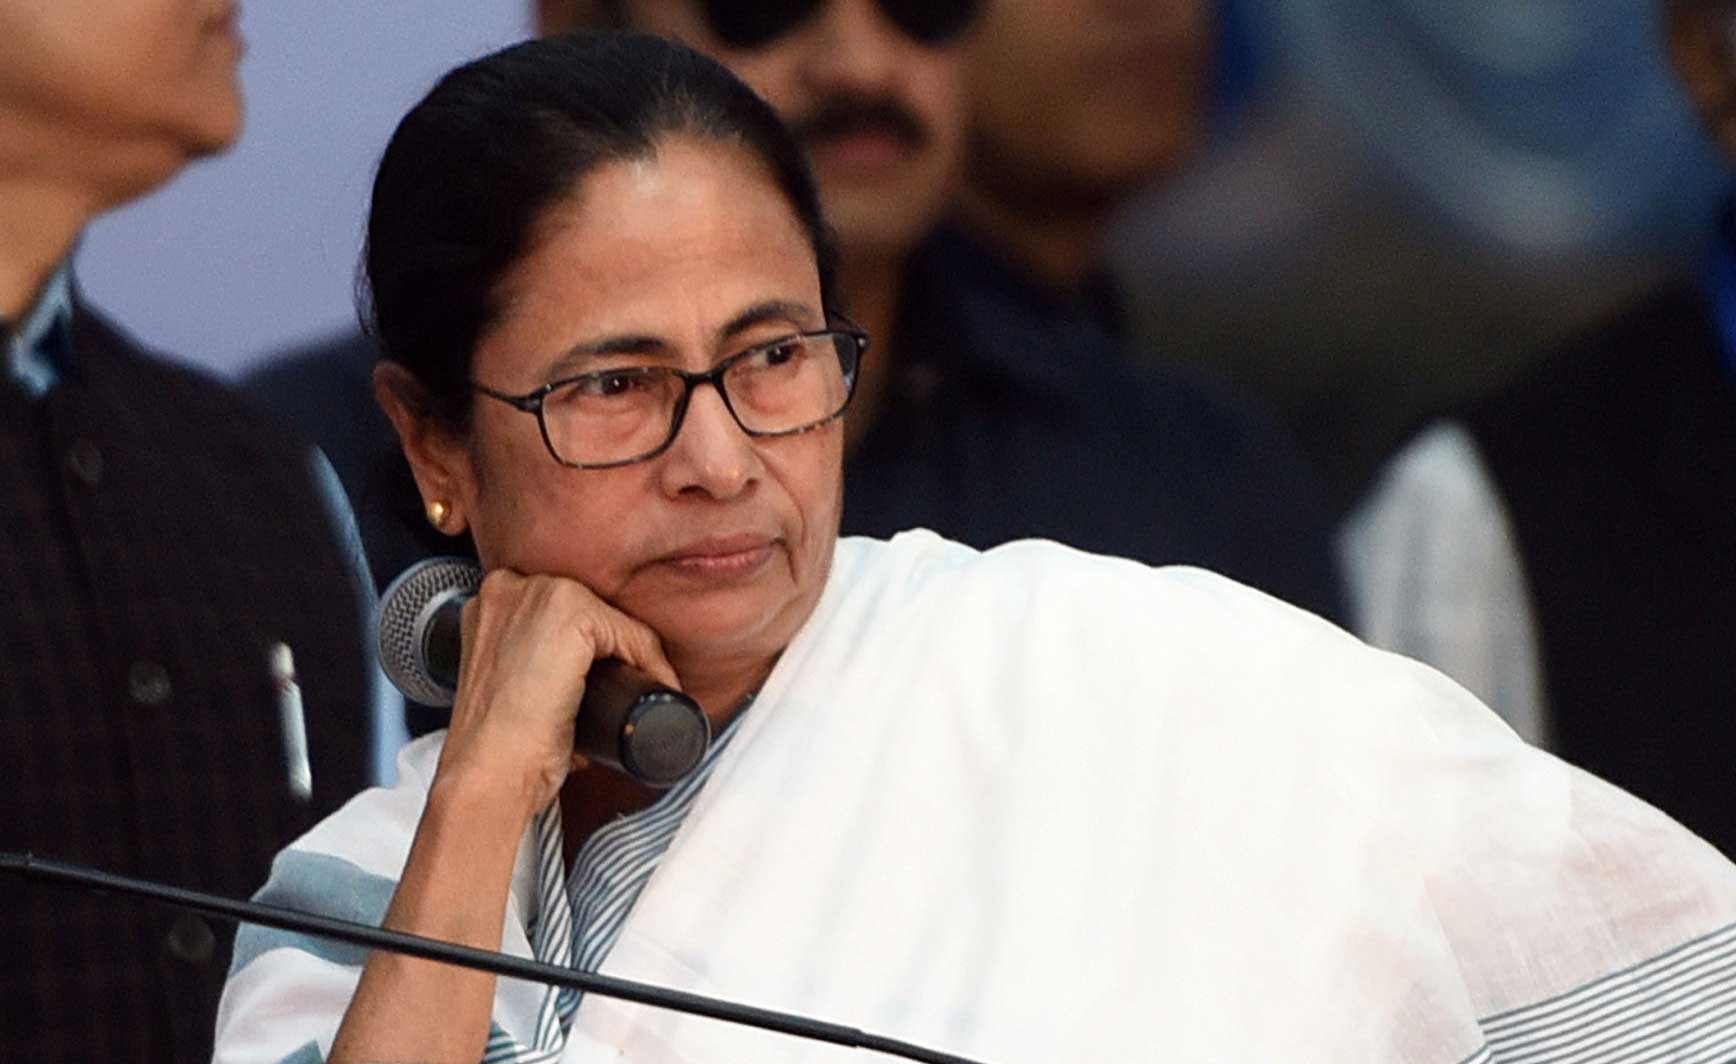 Mamata Banerjee had on Tuesday said he had been at her dharna venue not to participate but to do his “duty” because she was running the government from there.